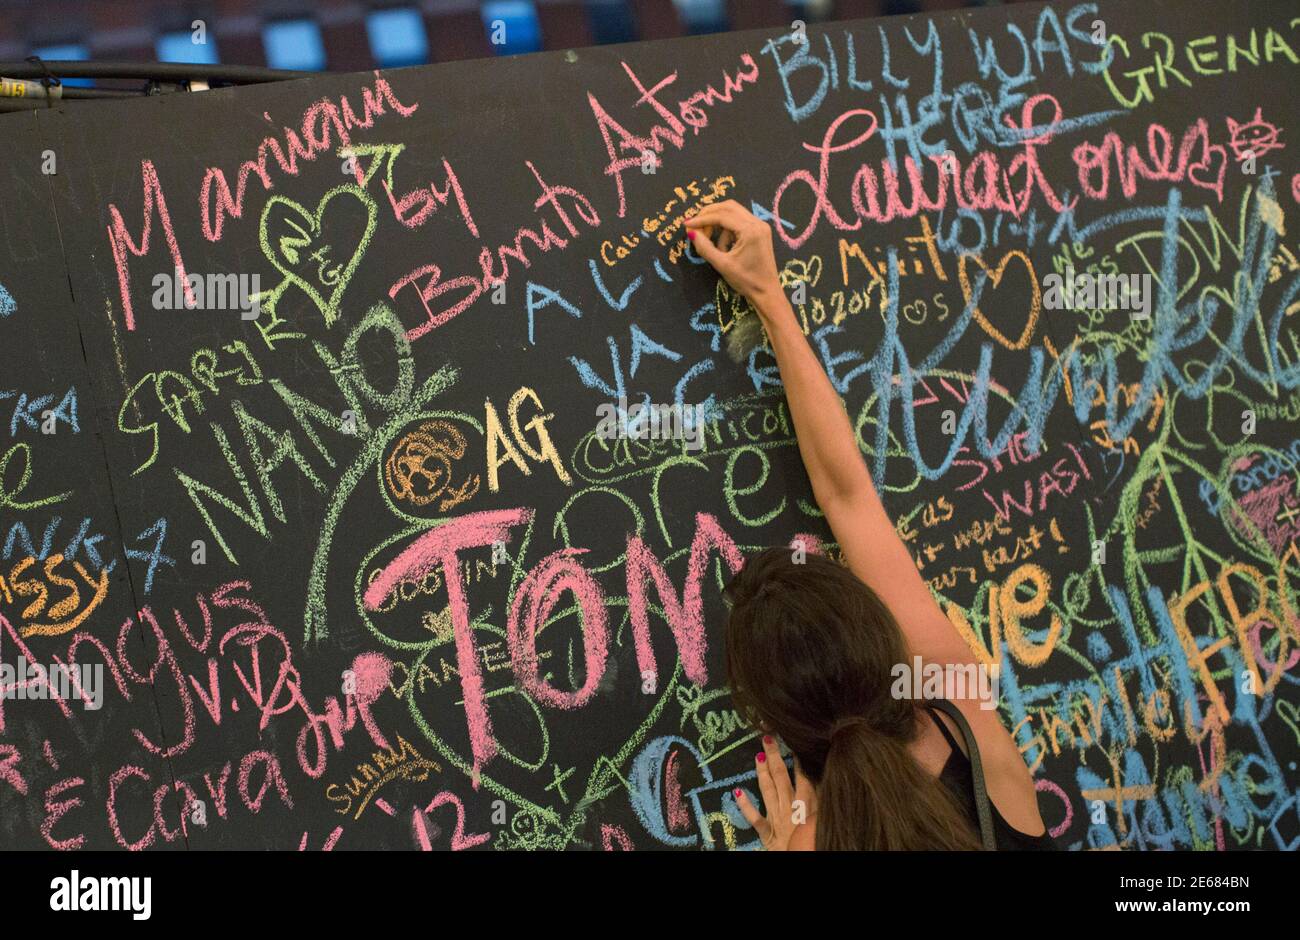 A woman adds her name to a chalkboard erected for Fashion's Night Out in New York's Meatpacking District September 6, 2012. Fashion's Night Out began in 2009 as a means to encourage consumers to shop and support the fashion industry during the tough economic climate. REUTERS/Andrew Kelly (UNITED STATES - Tags: FASHION) Stock Photo